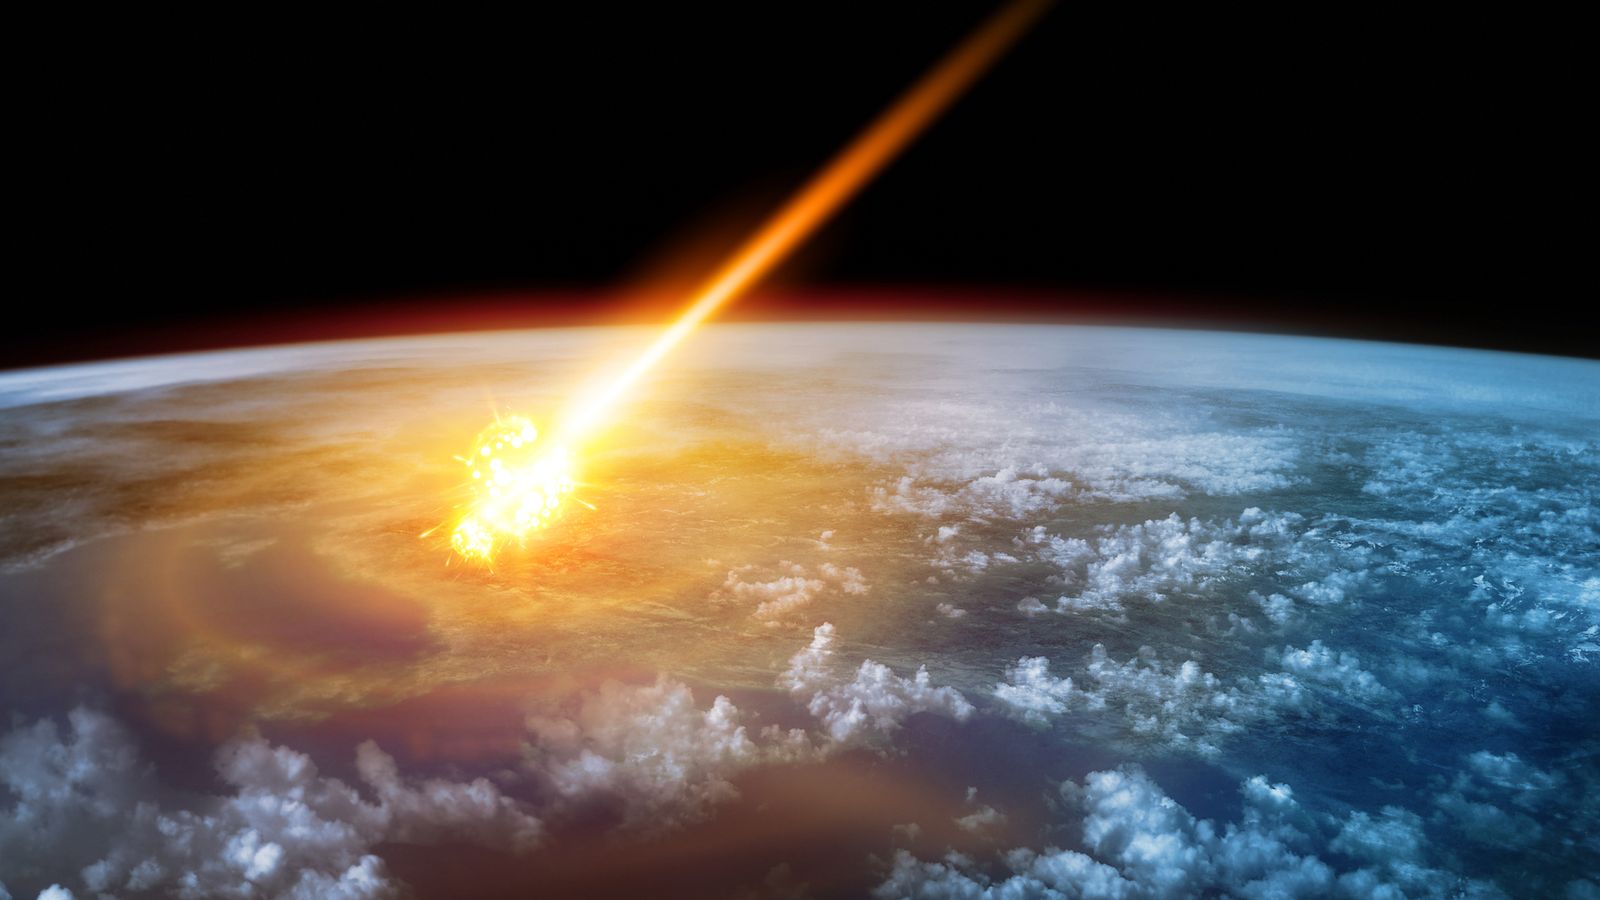 Scientists find evidence that continents were formed by giant meteor impacts 